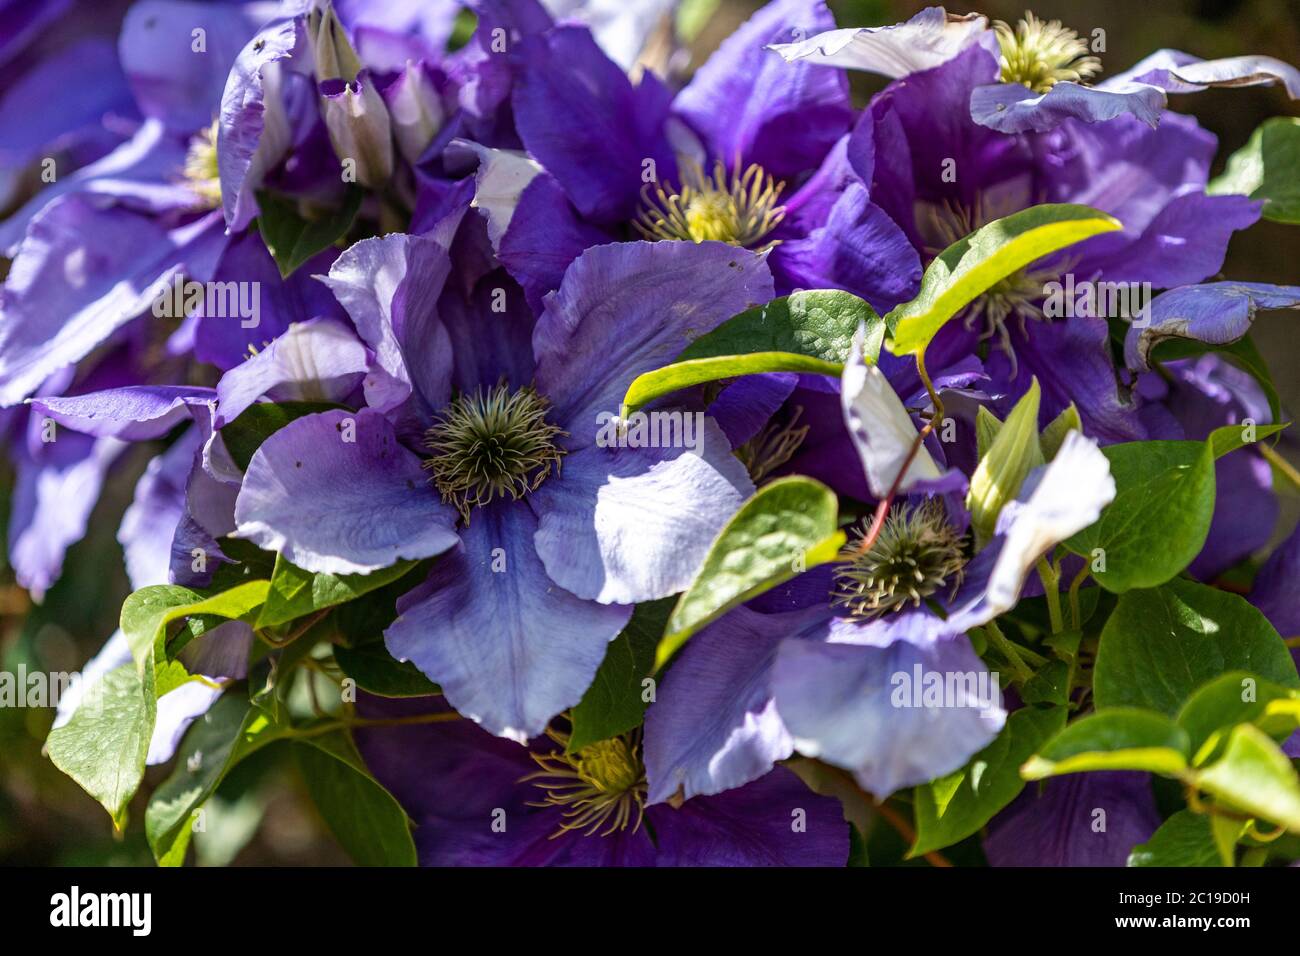 Clematis 'General Sikorski', deciduous climbing plant in full flower. Stock Photo